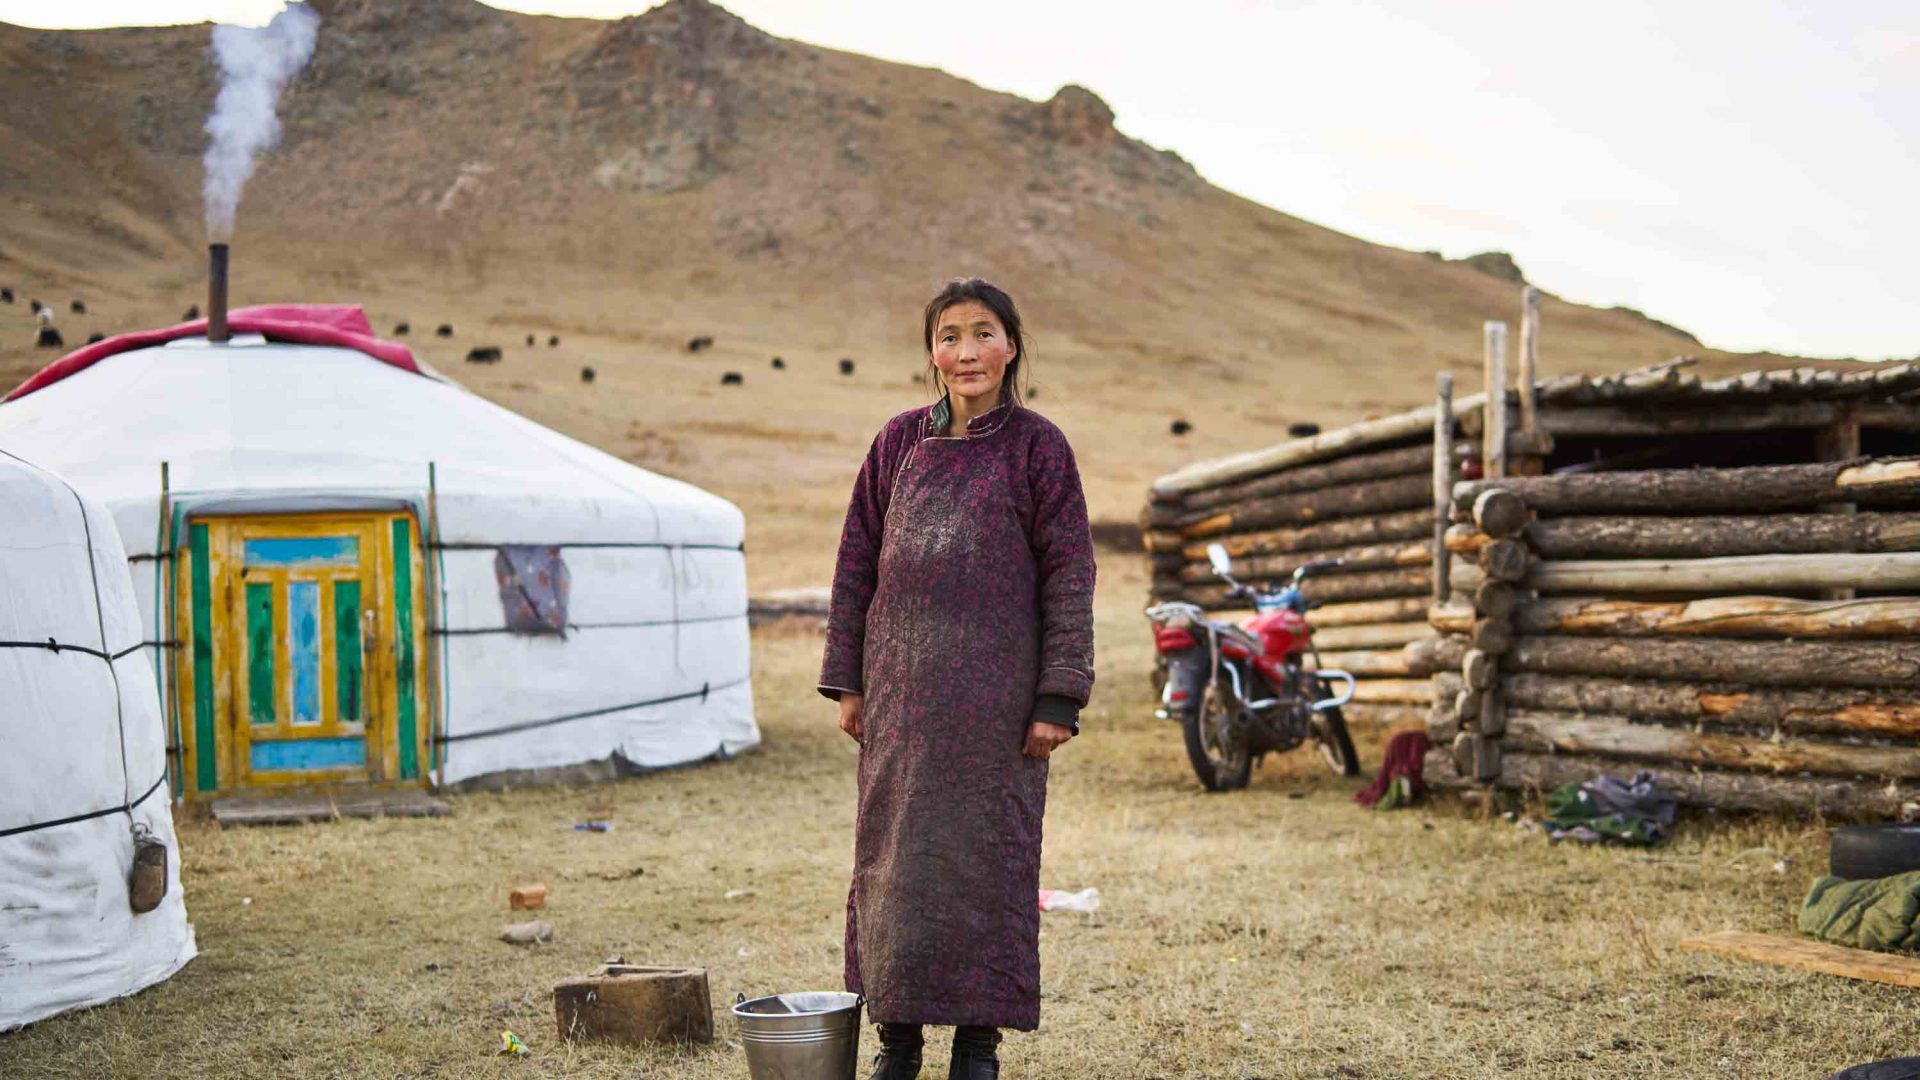 A woman stands out the front of some yurts and looks at the camera.